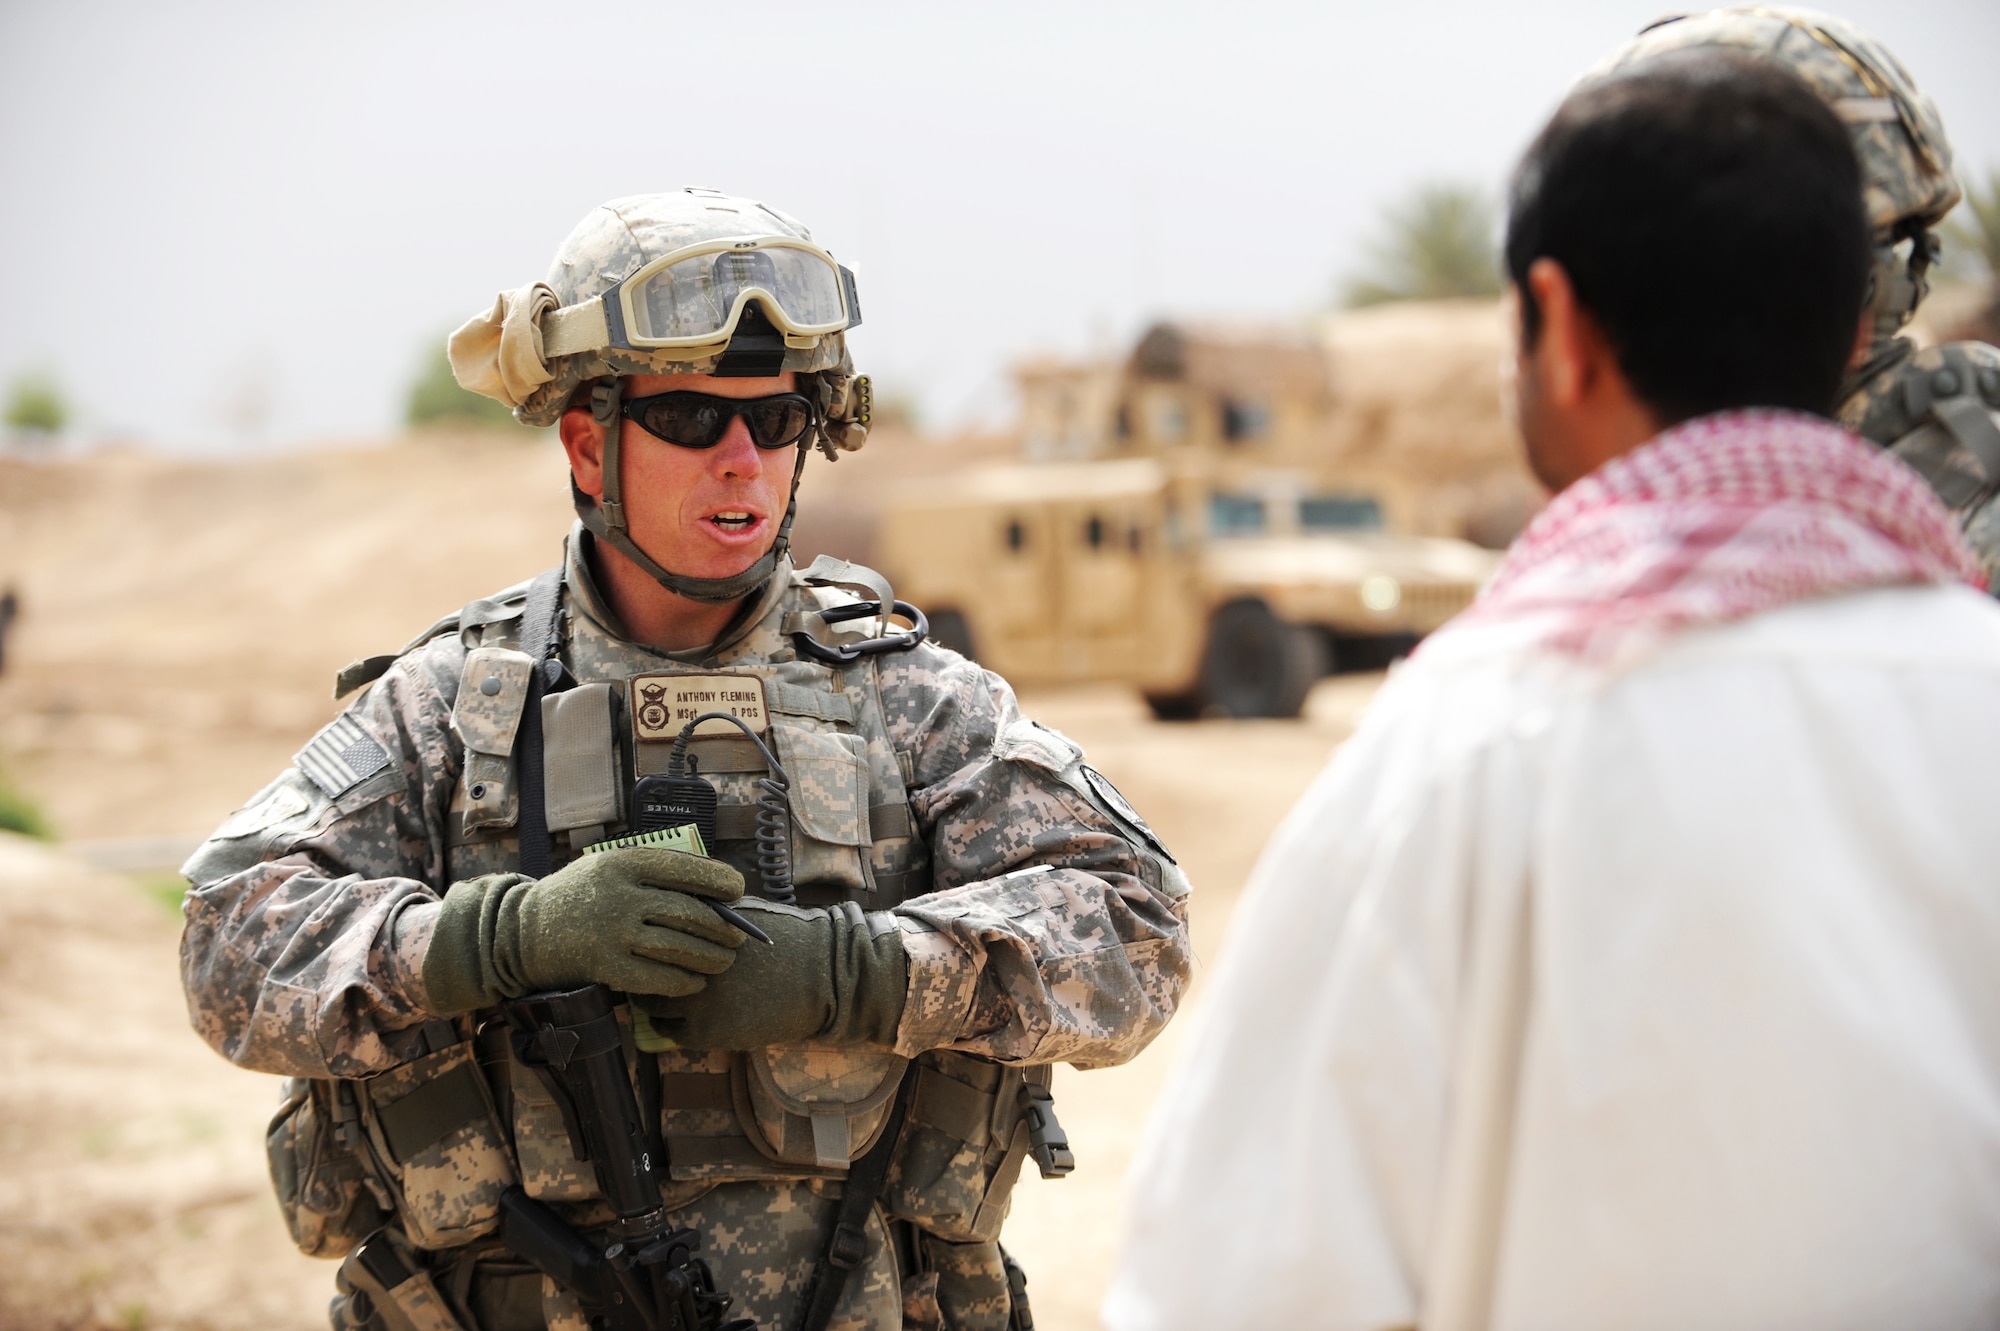 Master Sgt. Anthony Fleming conducts an interview April 9 with an Iraqi villager from Bakr.  He is assigned to the 532nd Expeditionary Security Forces Squadron at Joint Base Balad, Iraq.  (U.S. Air Force photo/Staff Sgt. James L. Harper Jr.)